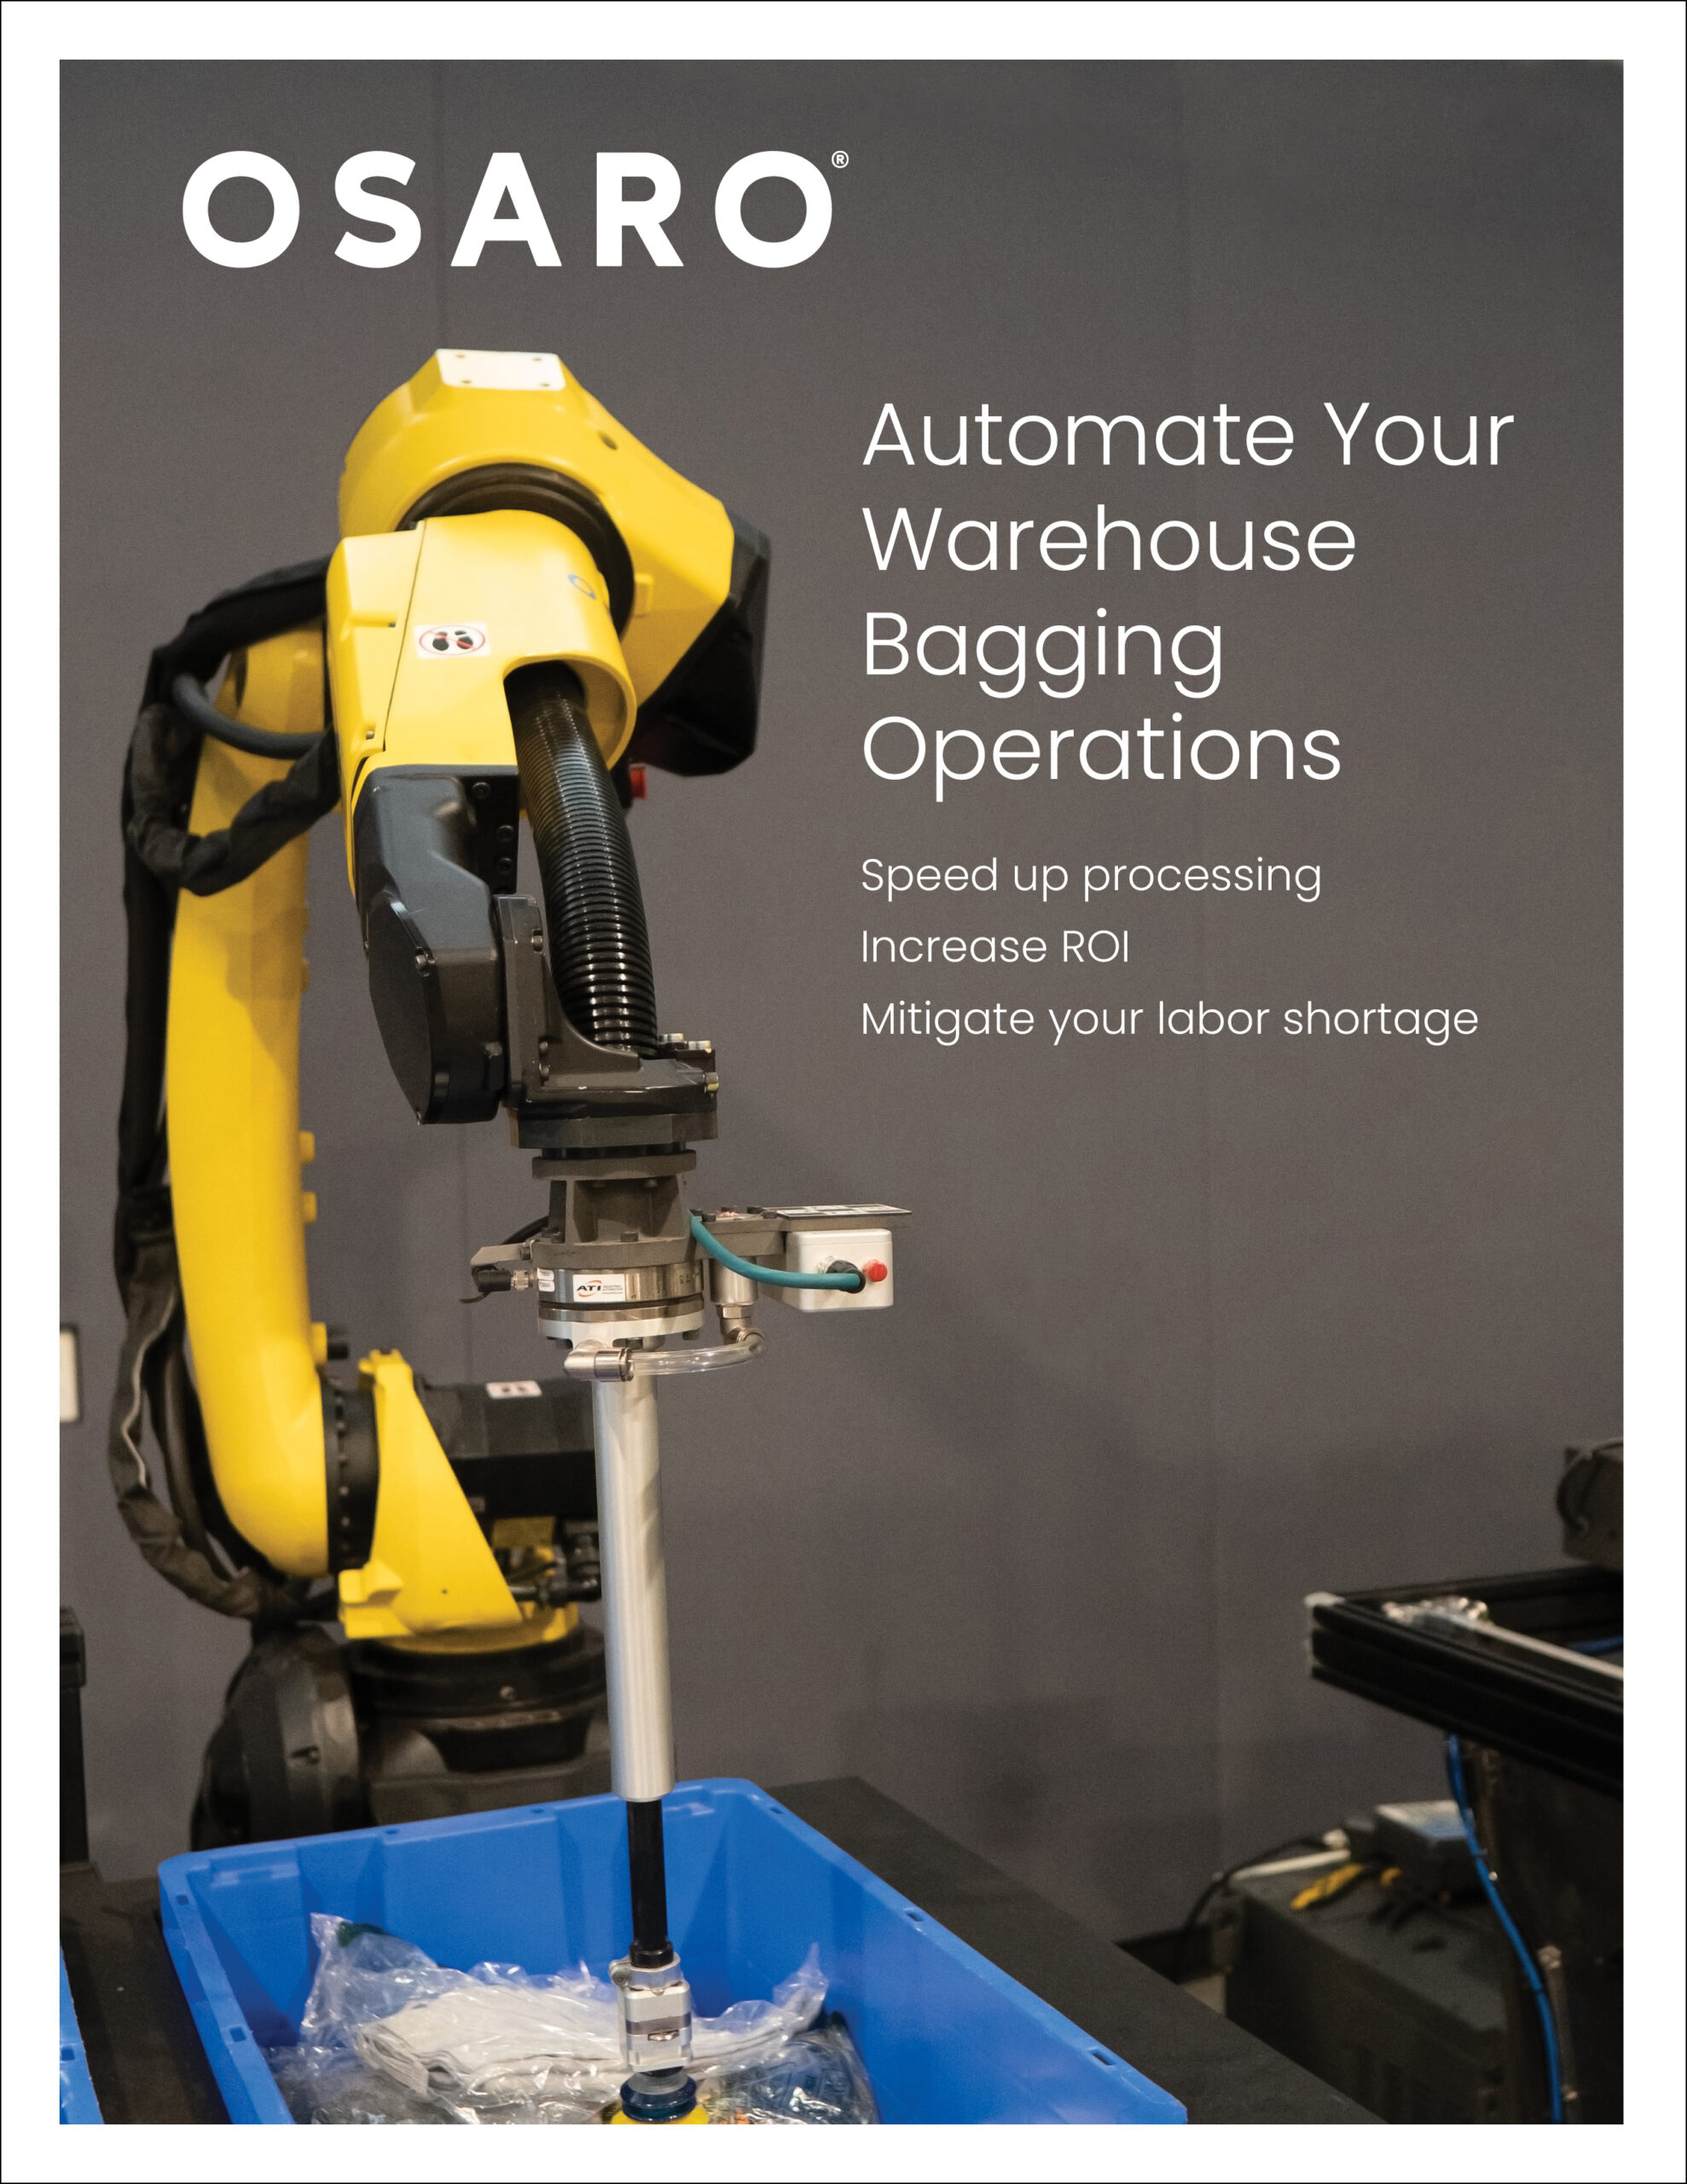 Automate Your Warehouse Bagging Operations